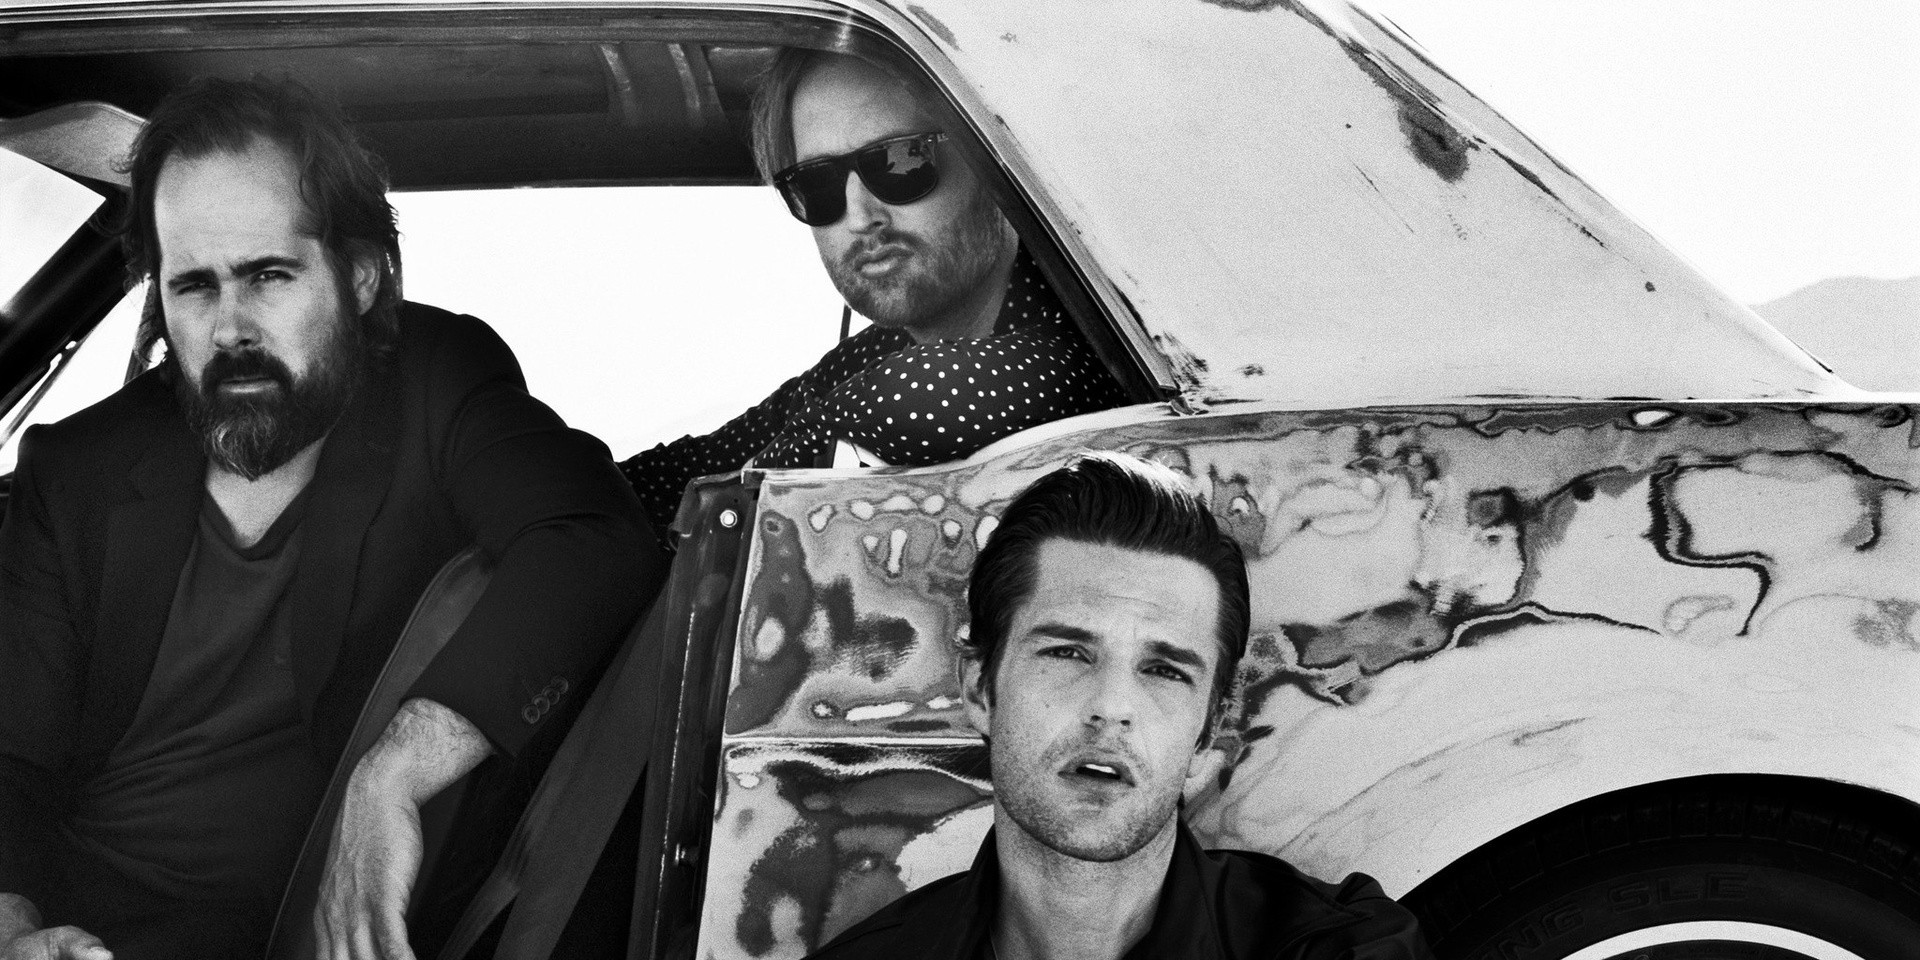 The Killers are coming to Asia in September